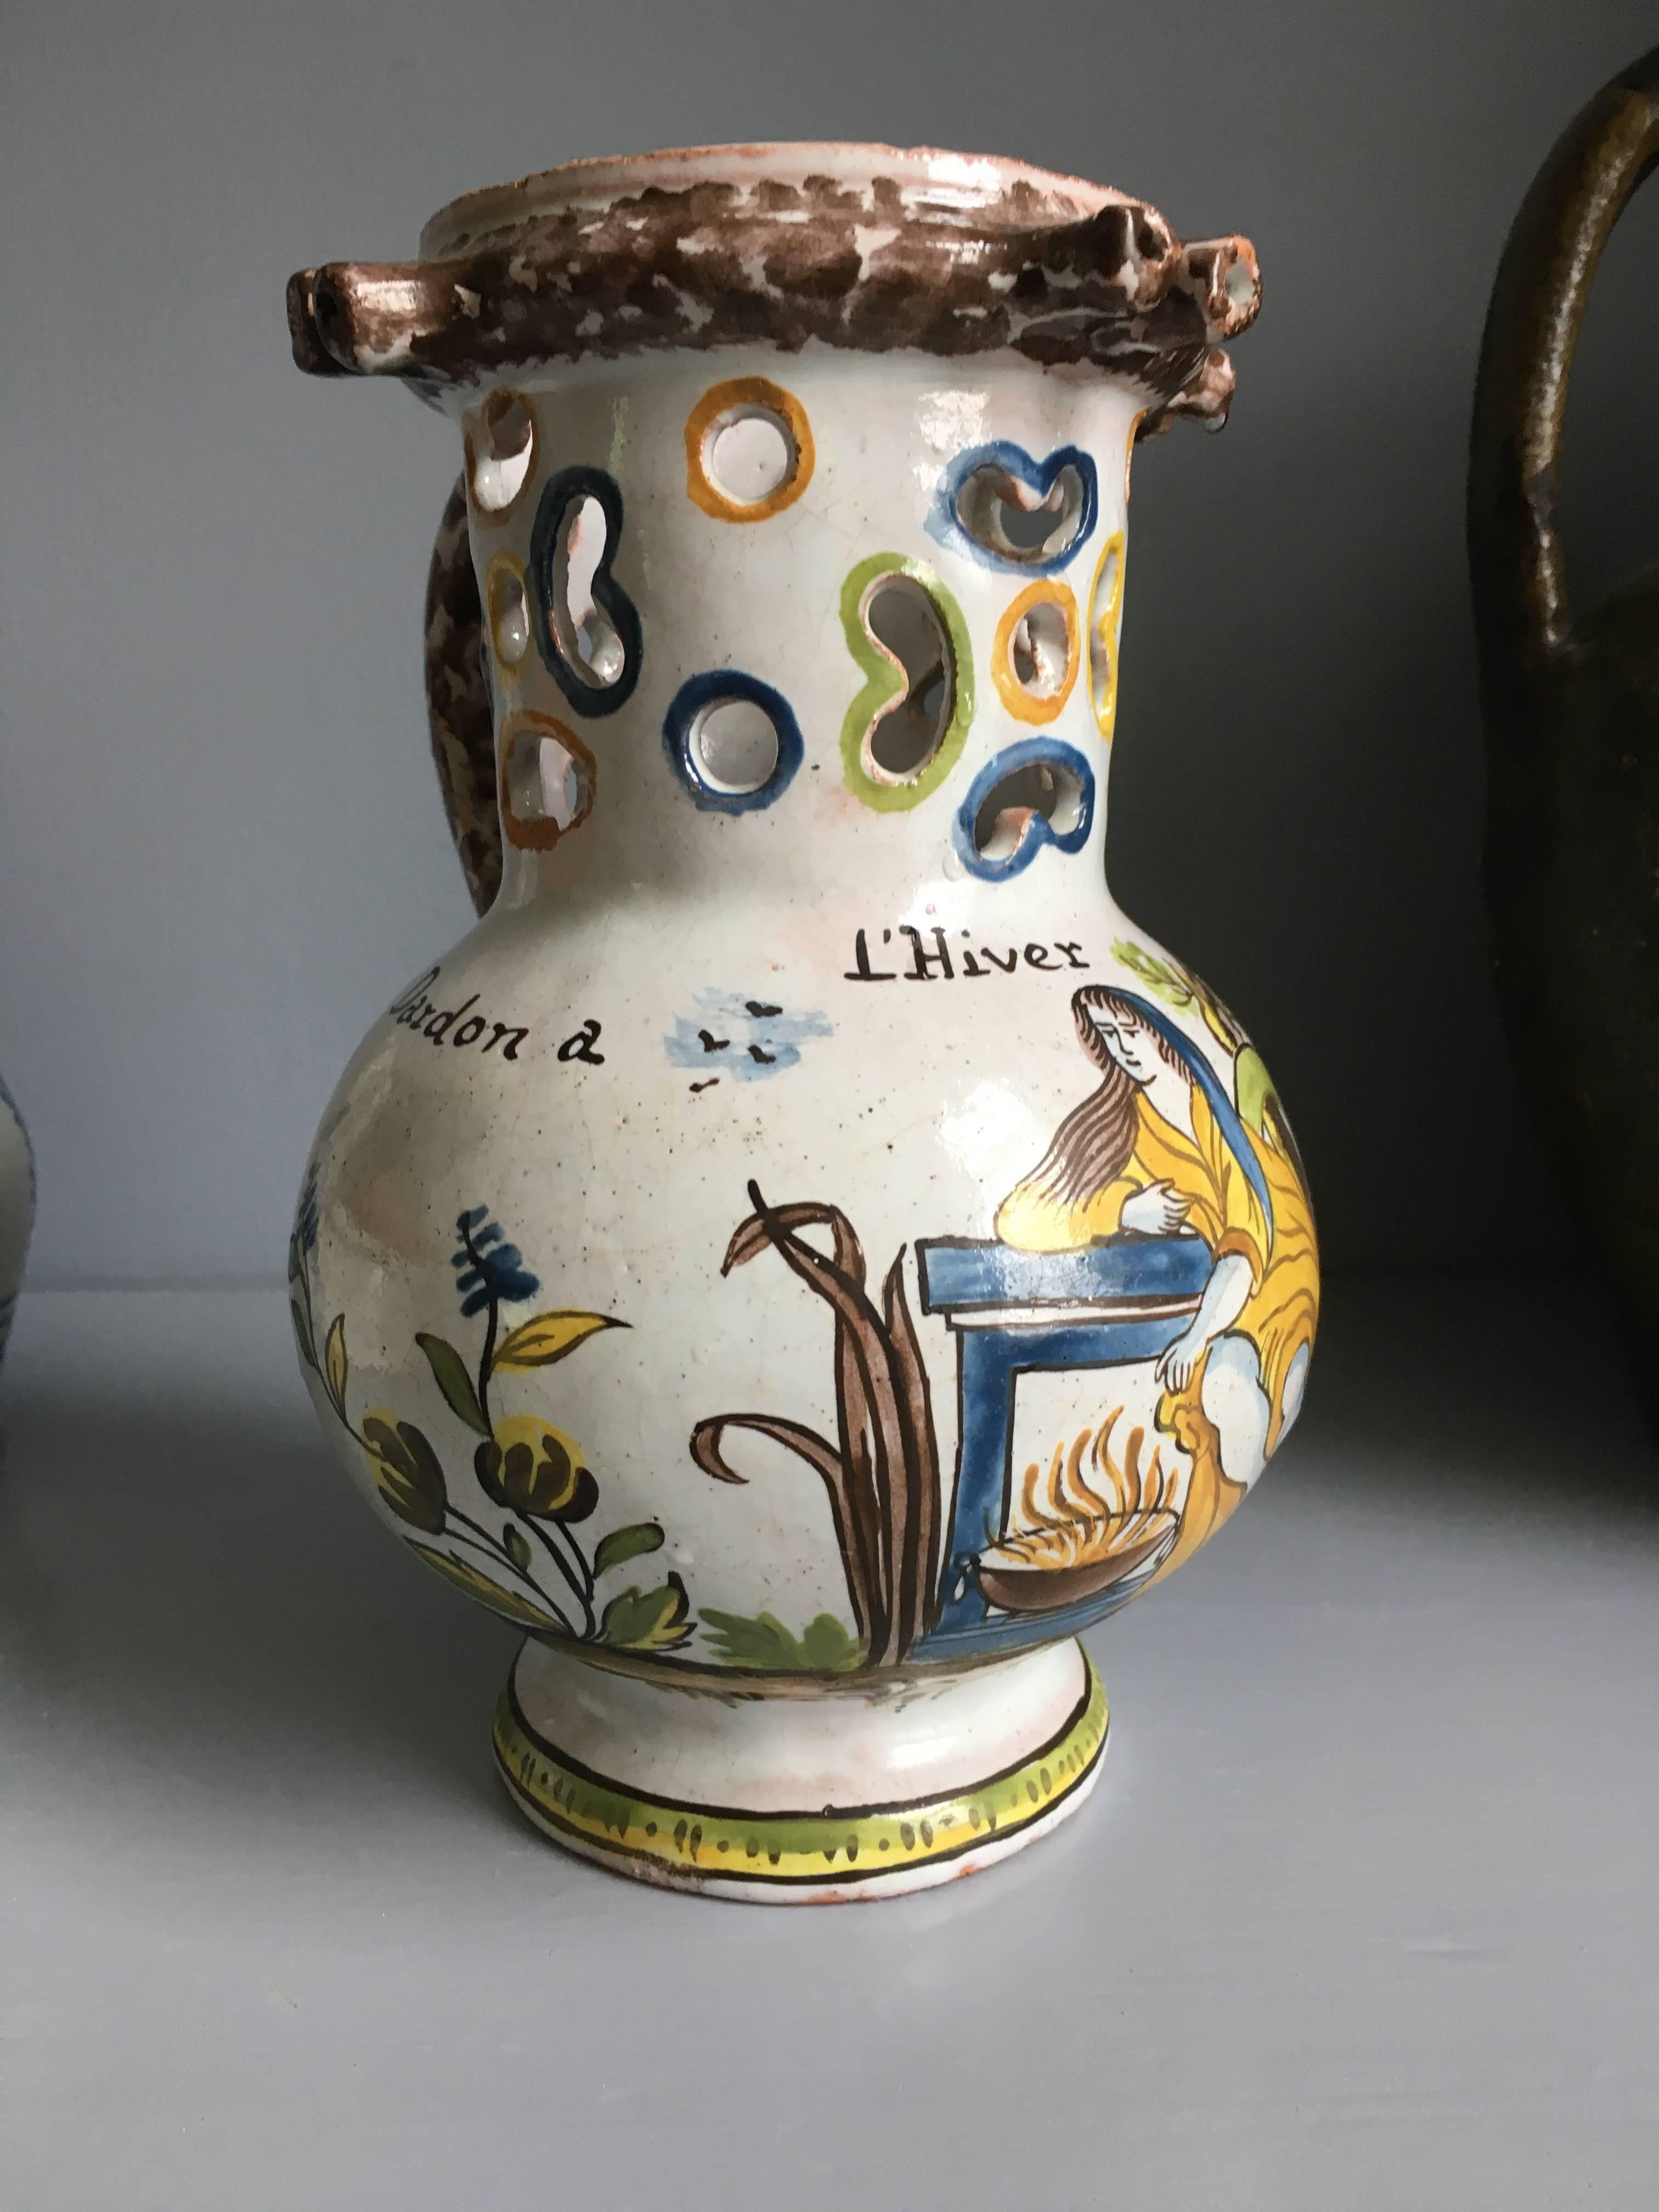 A charming 18th century faience “pichet trompeur” from the town of Nevers. The jug is decorated with a glazed scene of a woman seated before a fireplace with the word ”L’Hiver” (the winter) and flanked with two names Jules Dardon a Pierre Veron. The